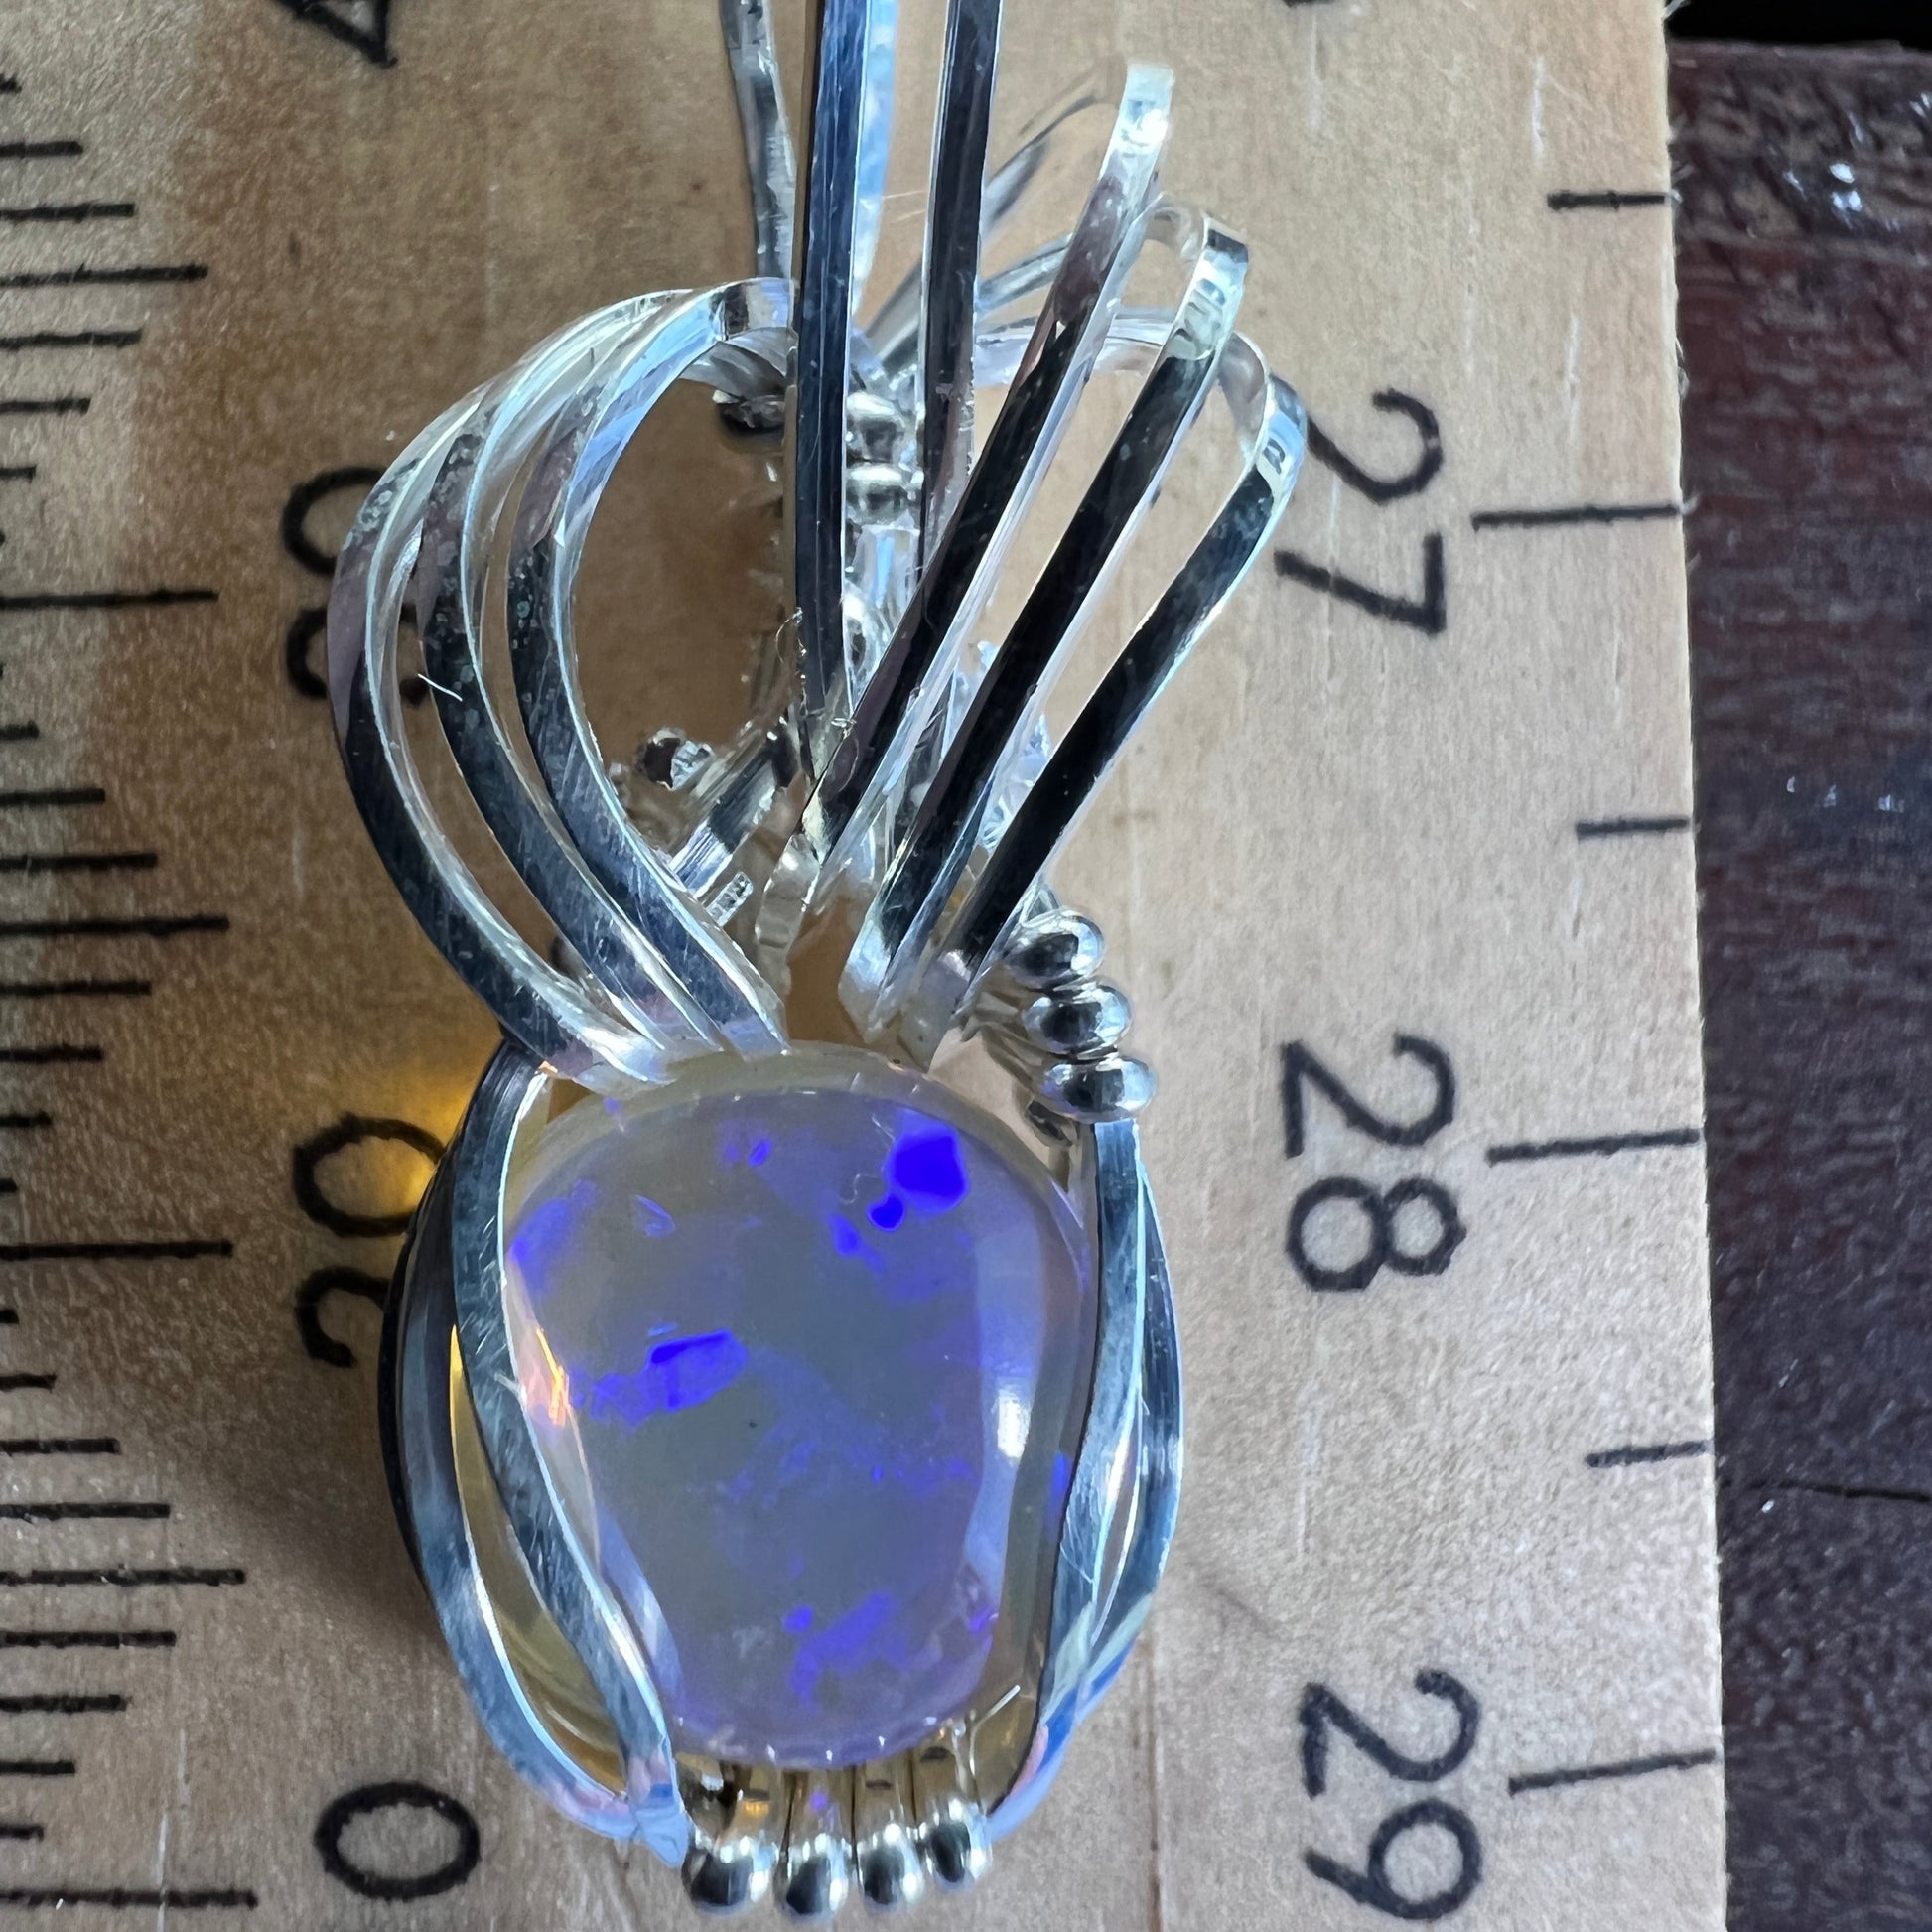 Beautifully cut Lightning Ridge Jelly Crystal opal. Cut and polished by Bill Johnson. Expertly set in a unique silver wire wrap. An awesome hand made gift. 